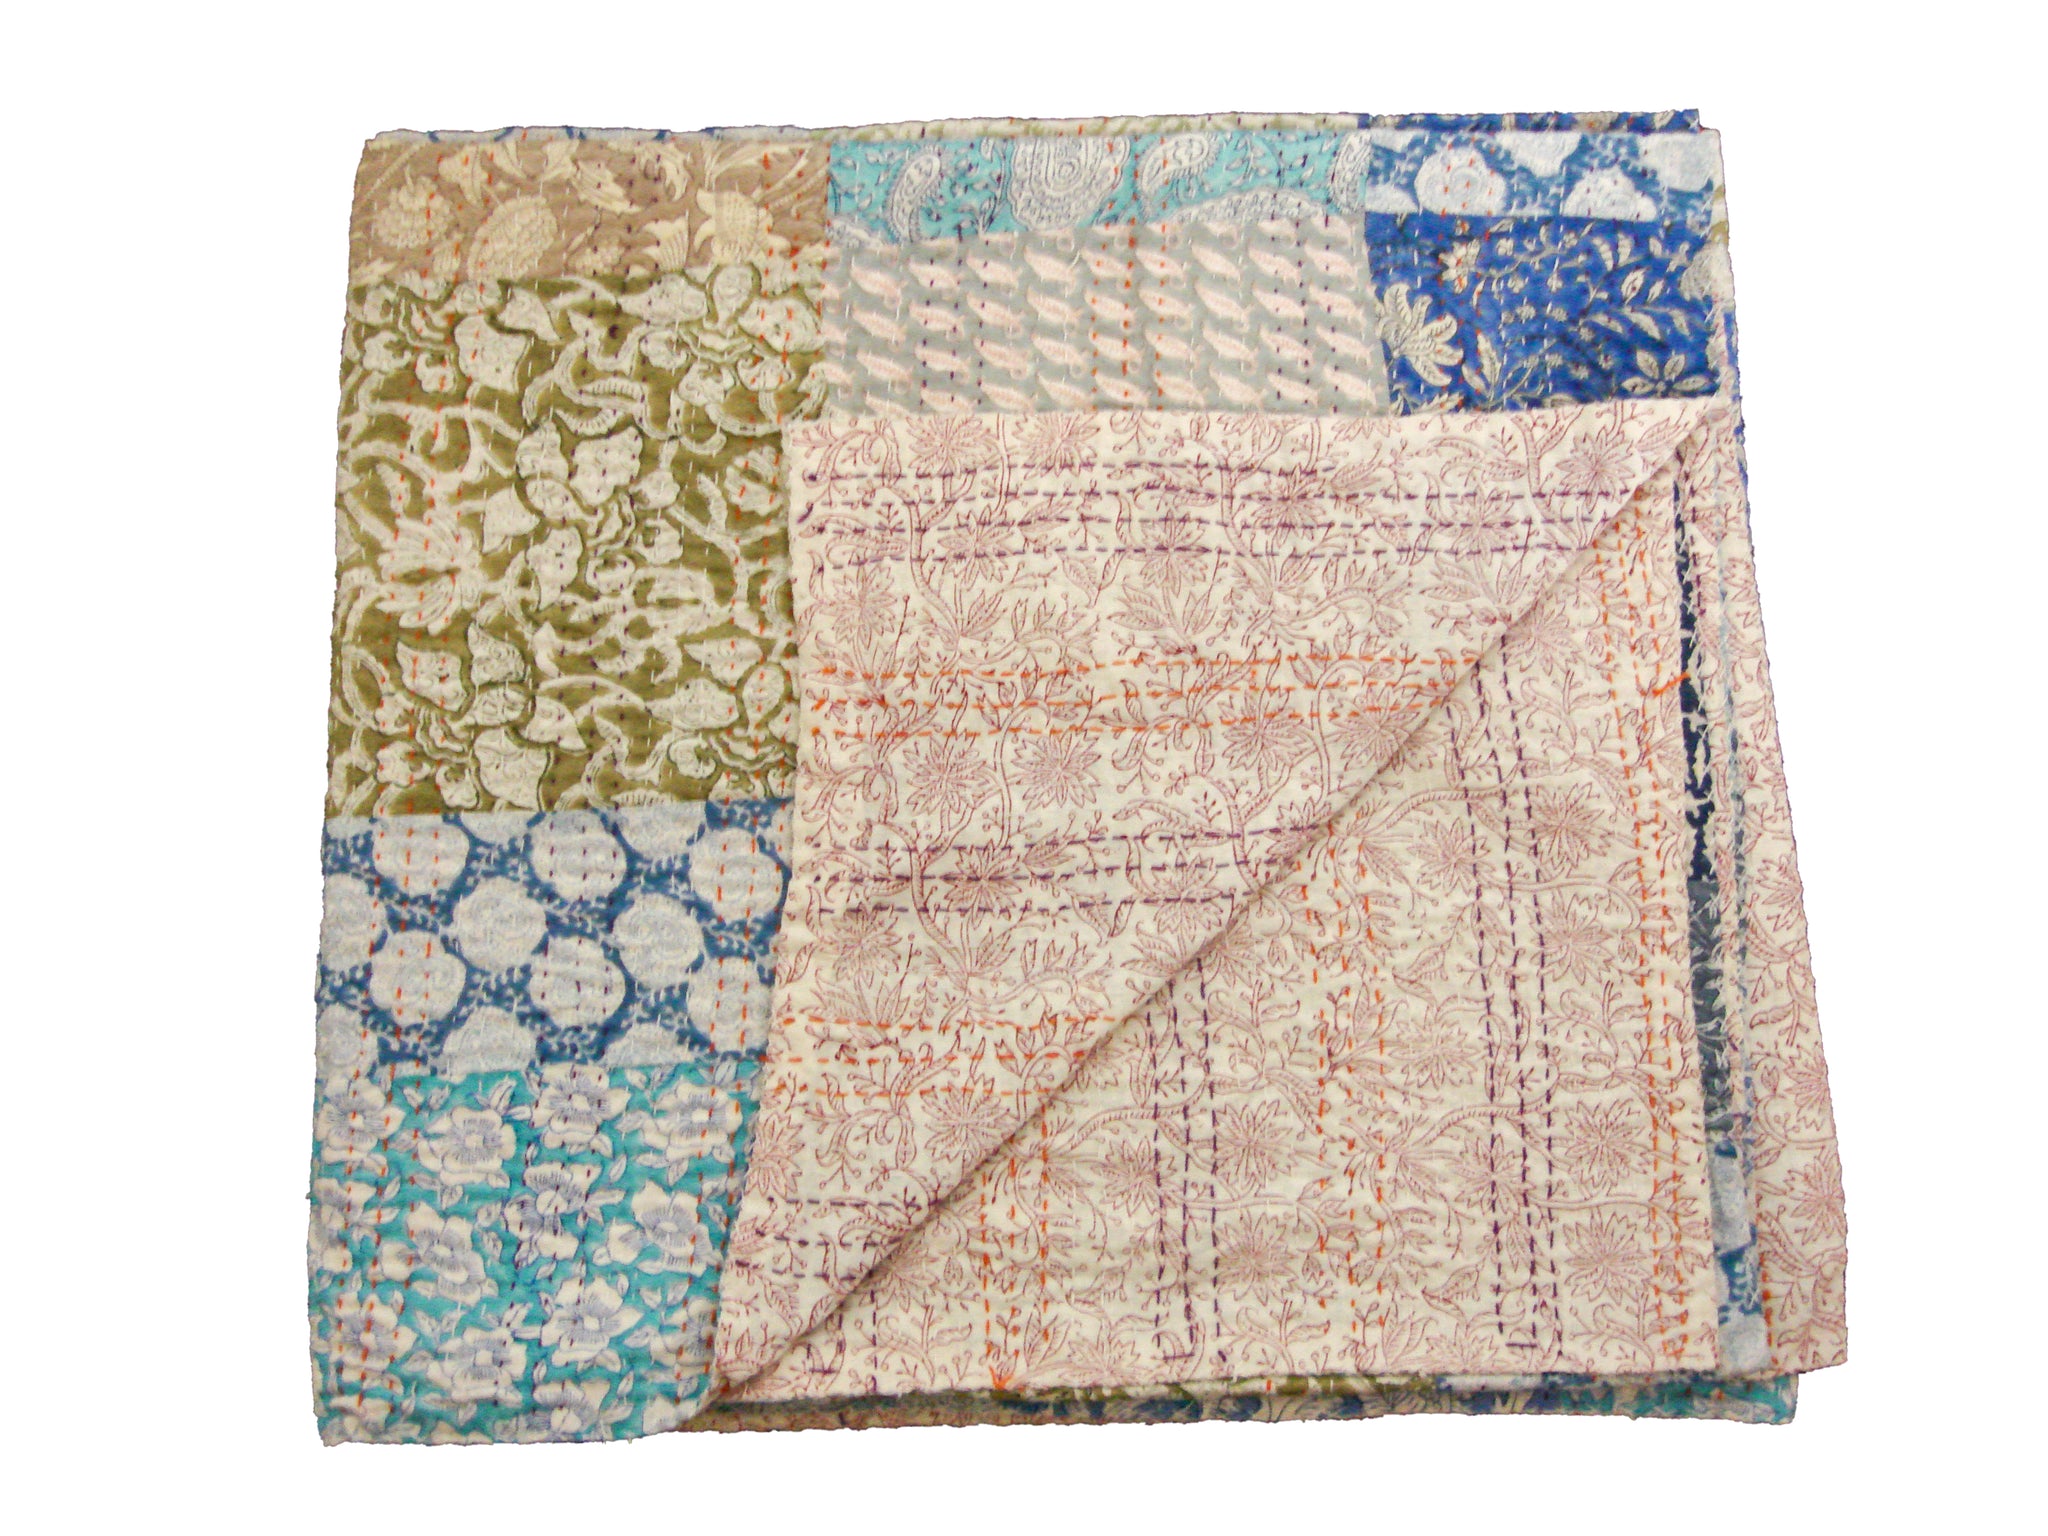 Handmade Patchwork Throw - Multicolored Patchwork